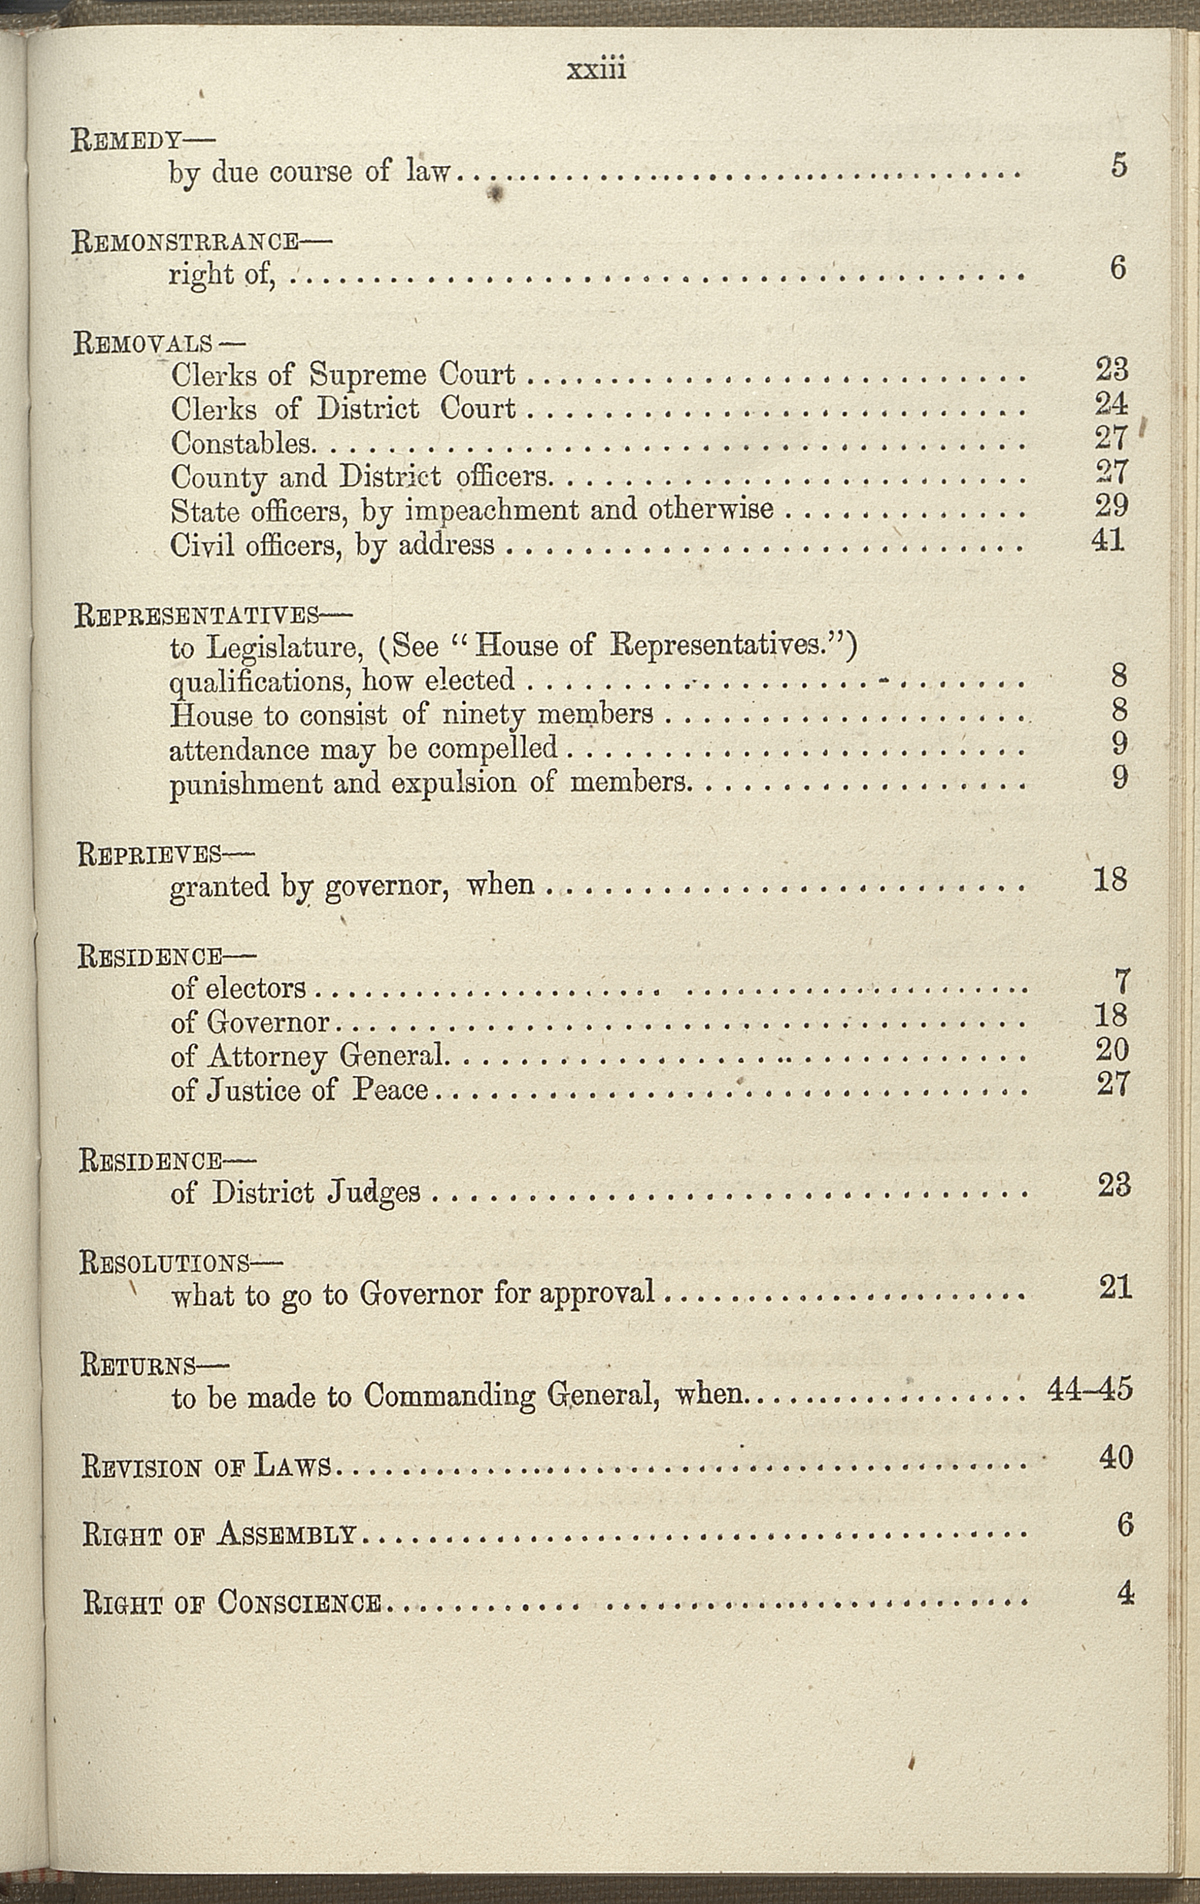 page 23 - 1869 index